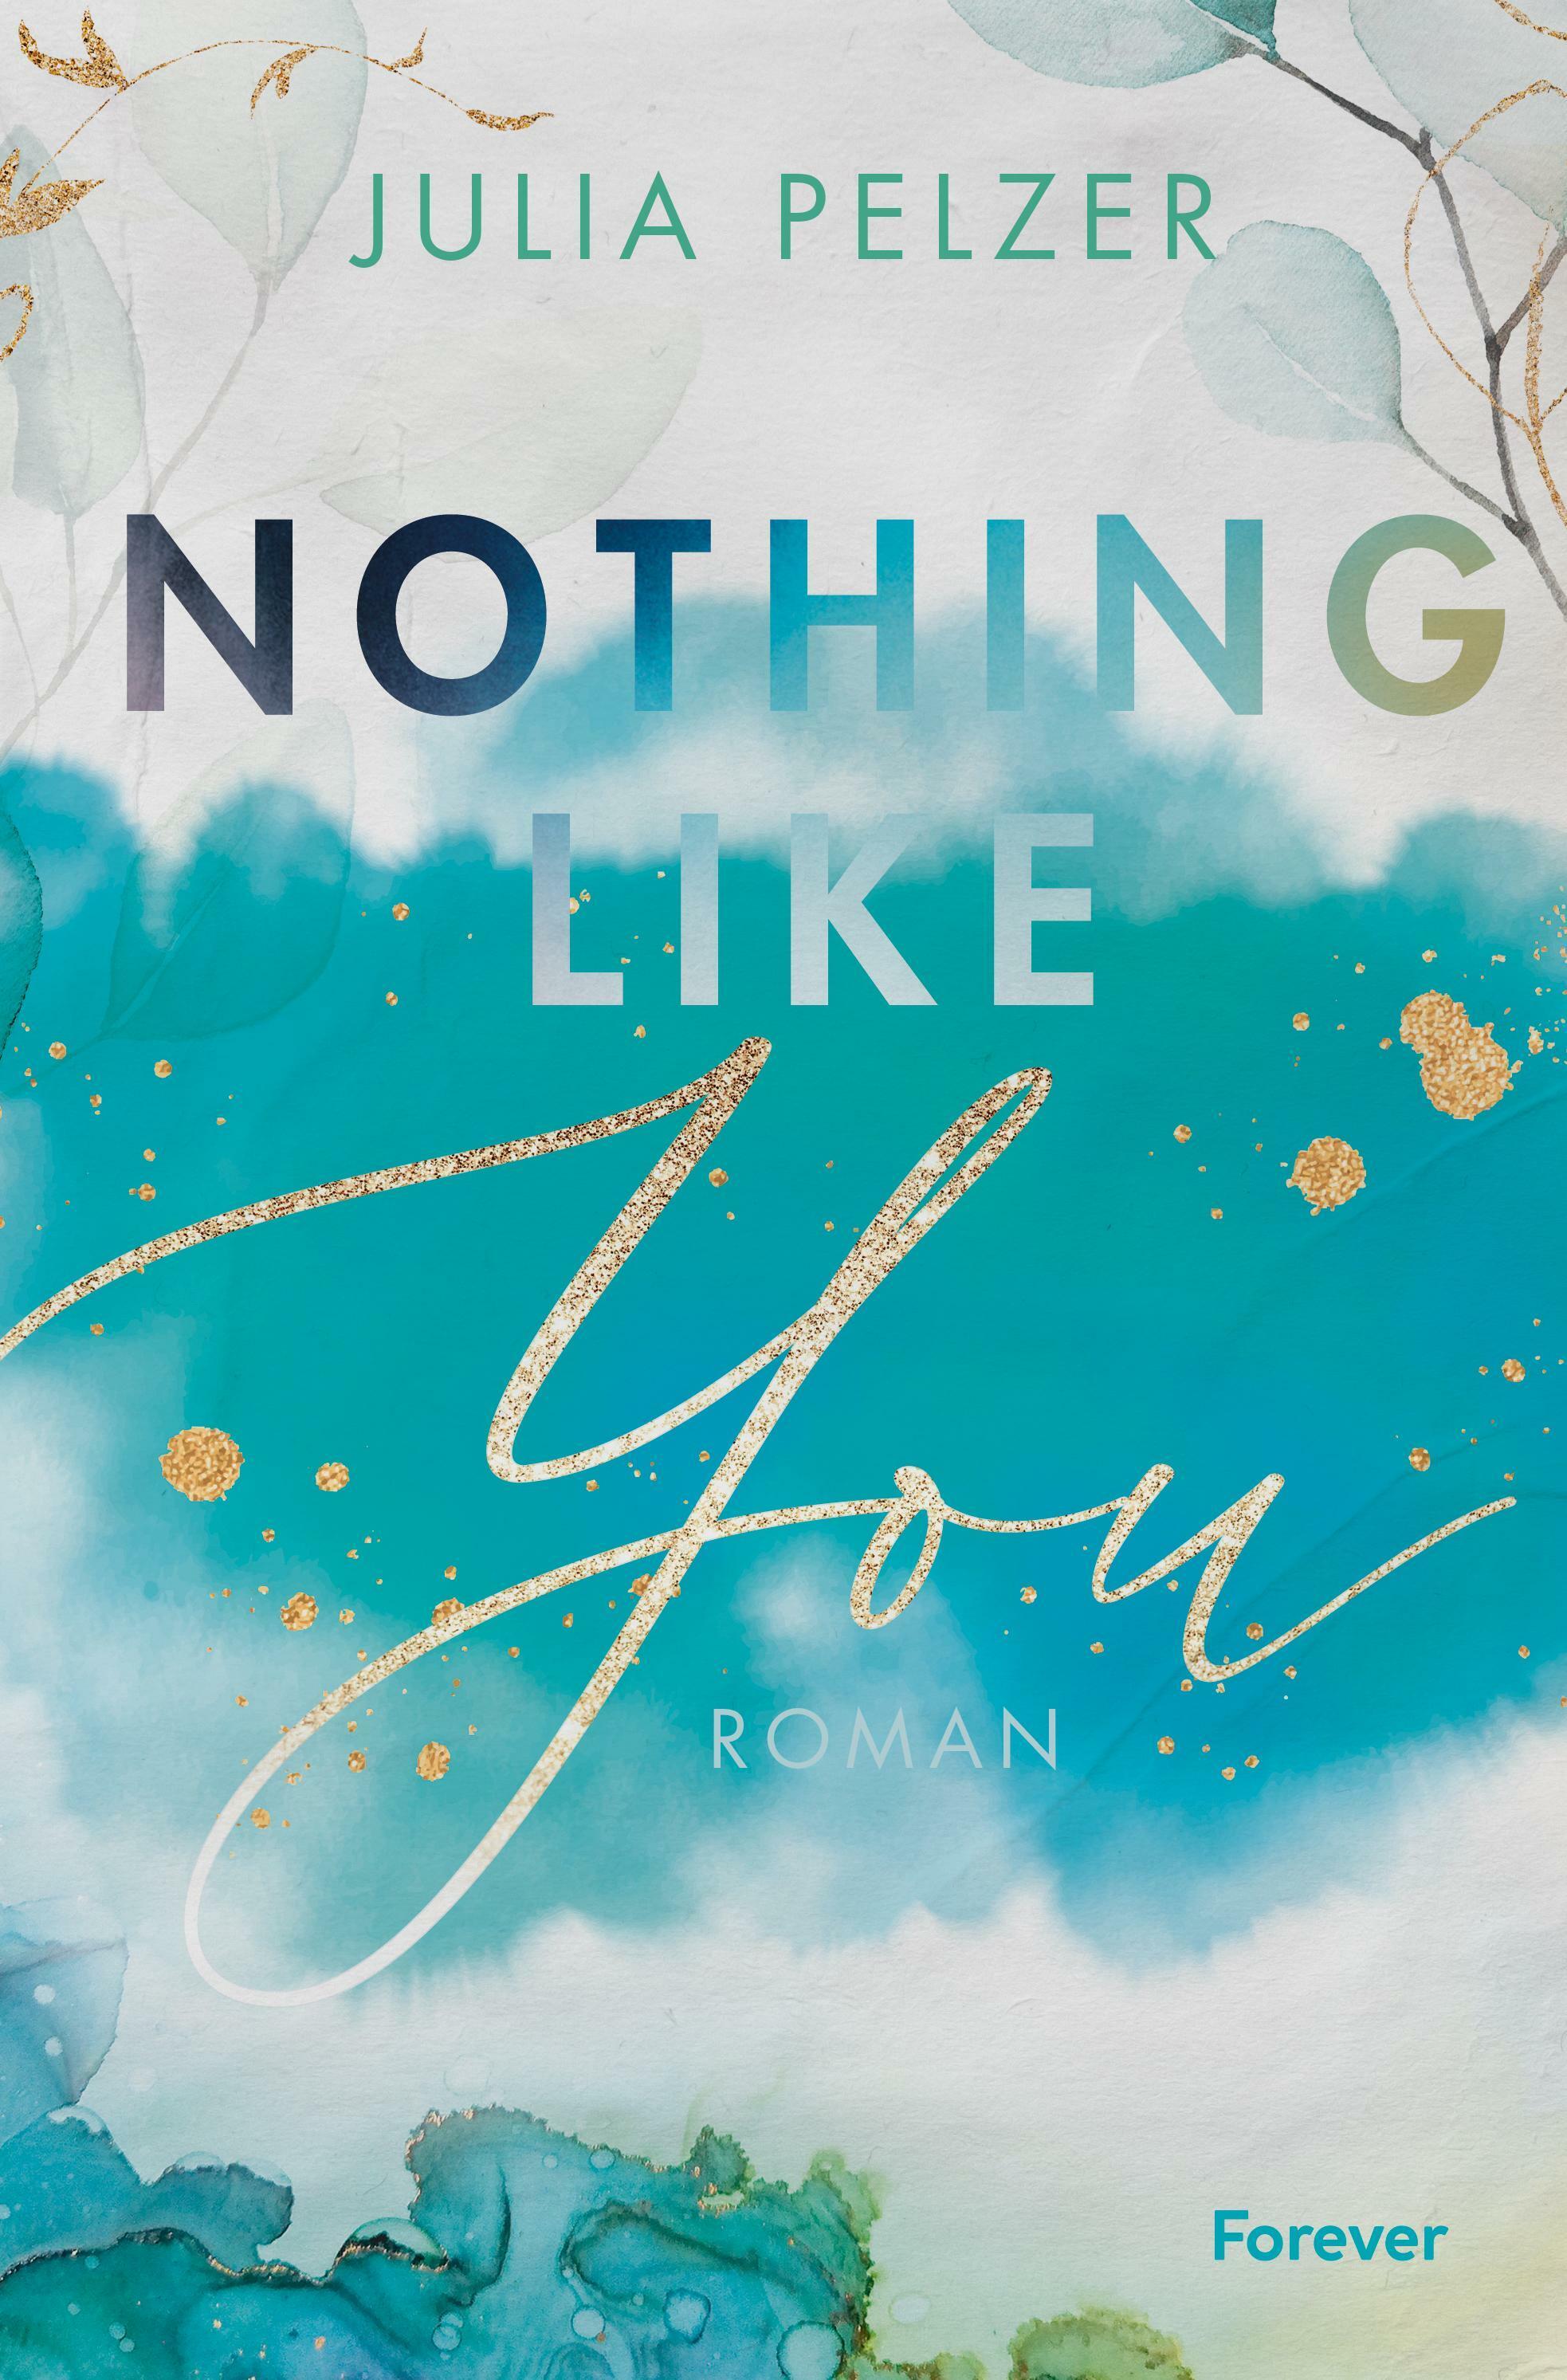 Buchcover von Nothing Like You